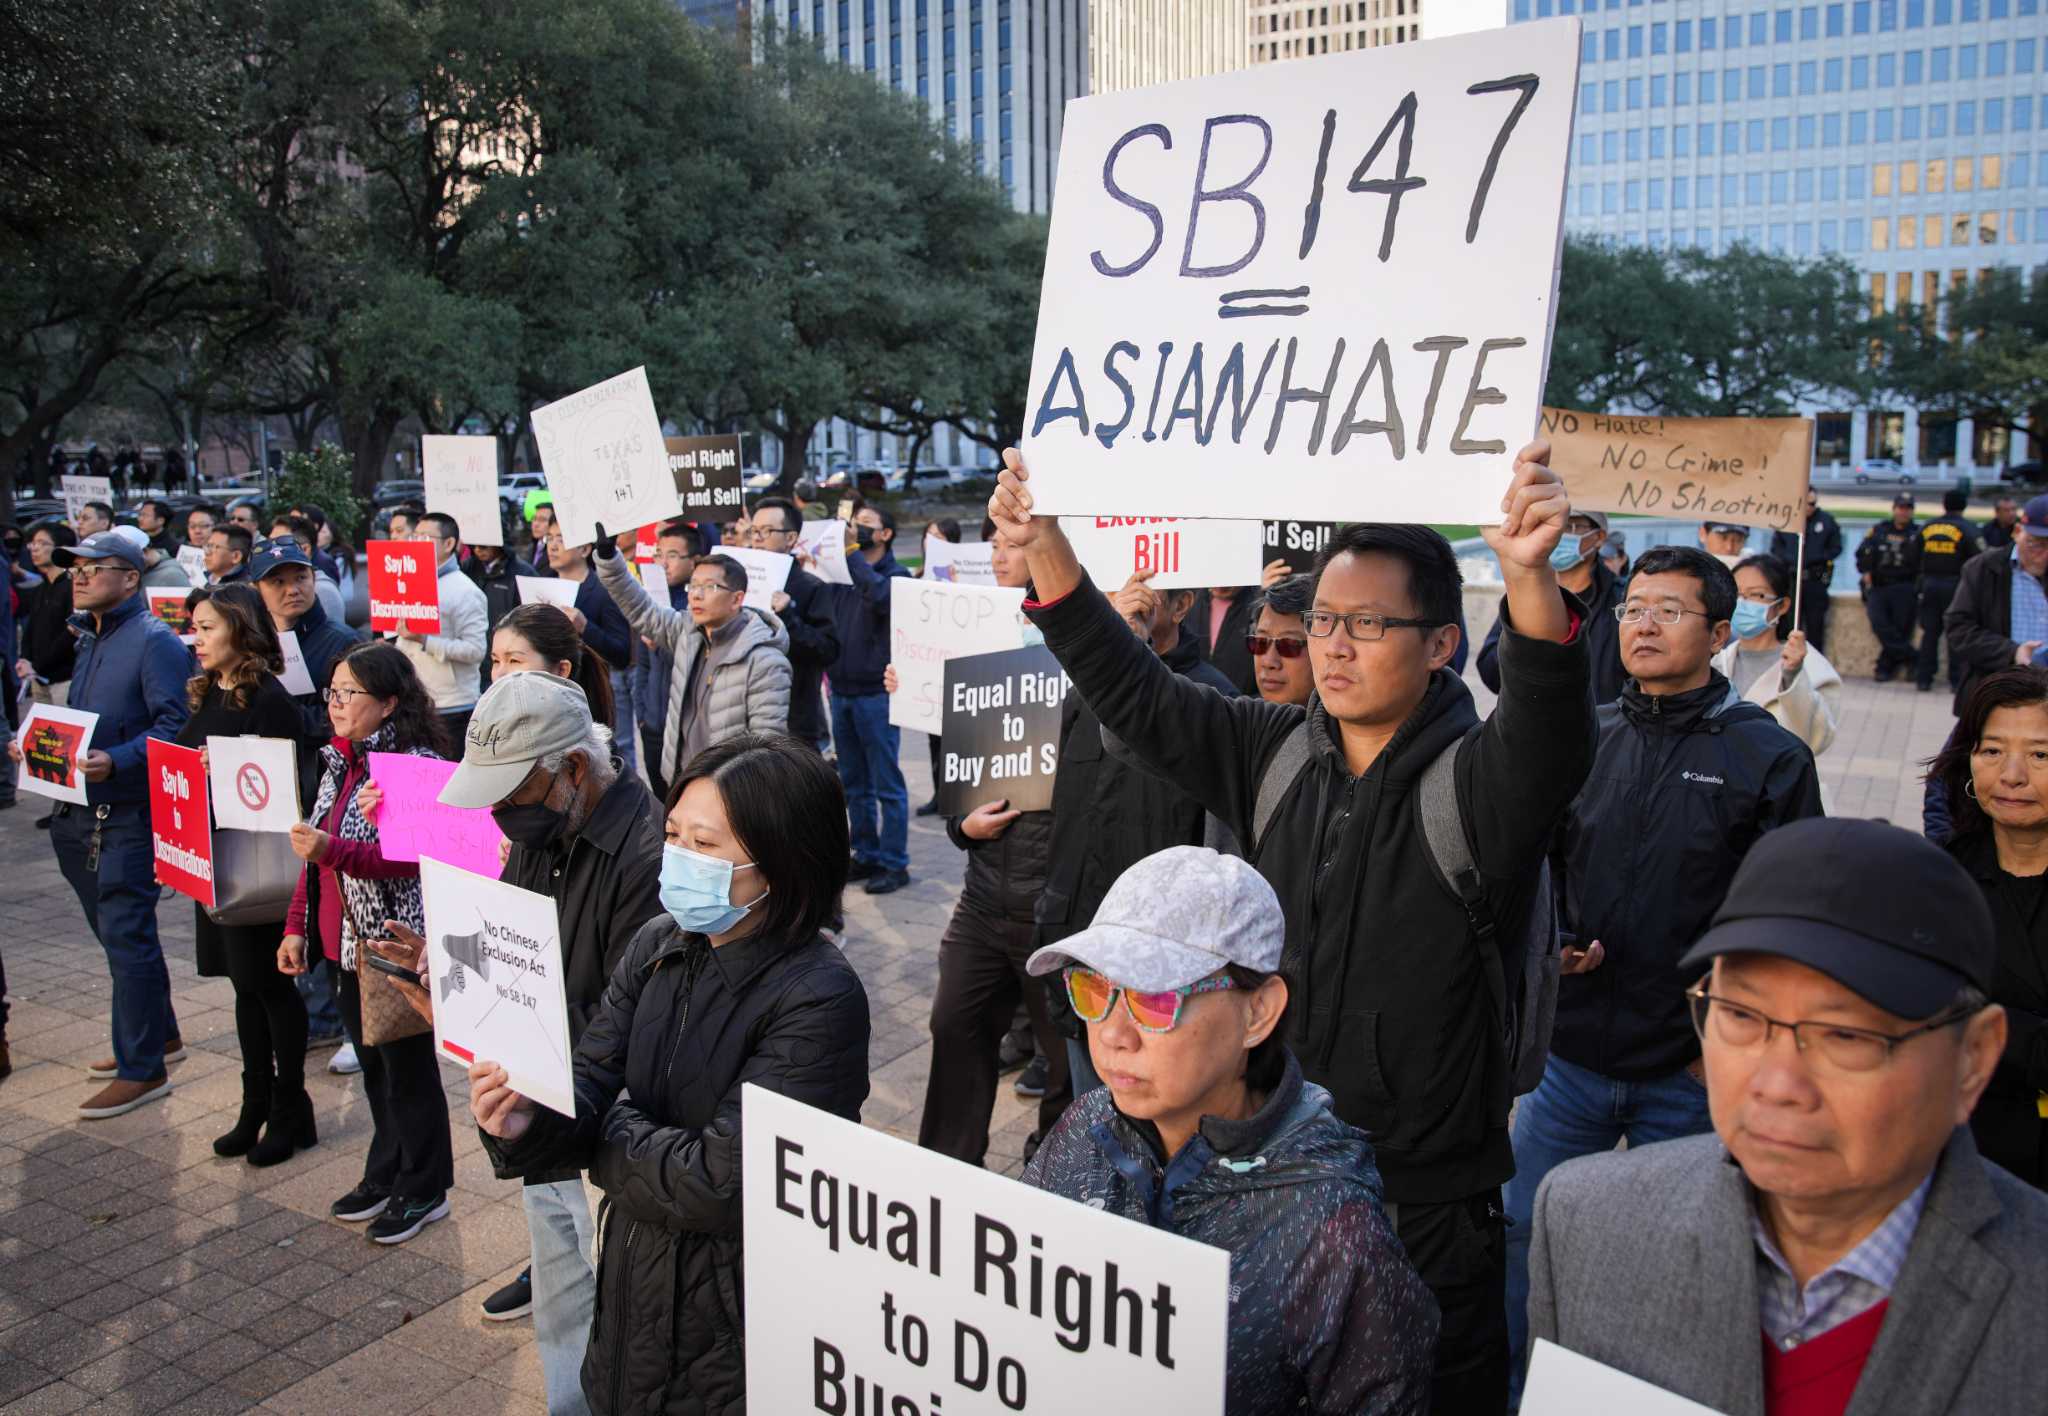 Abbott's proposed Texas land ban SB 147 decried by Houston protesters